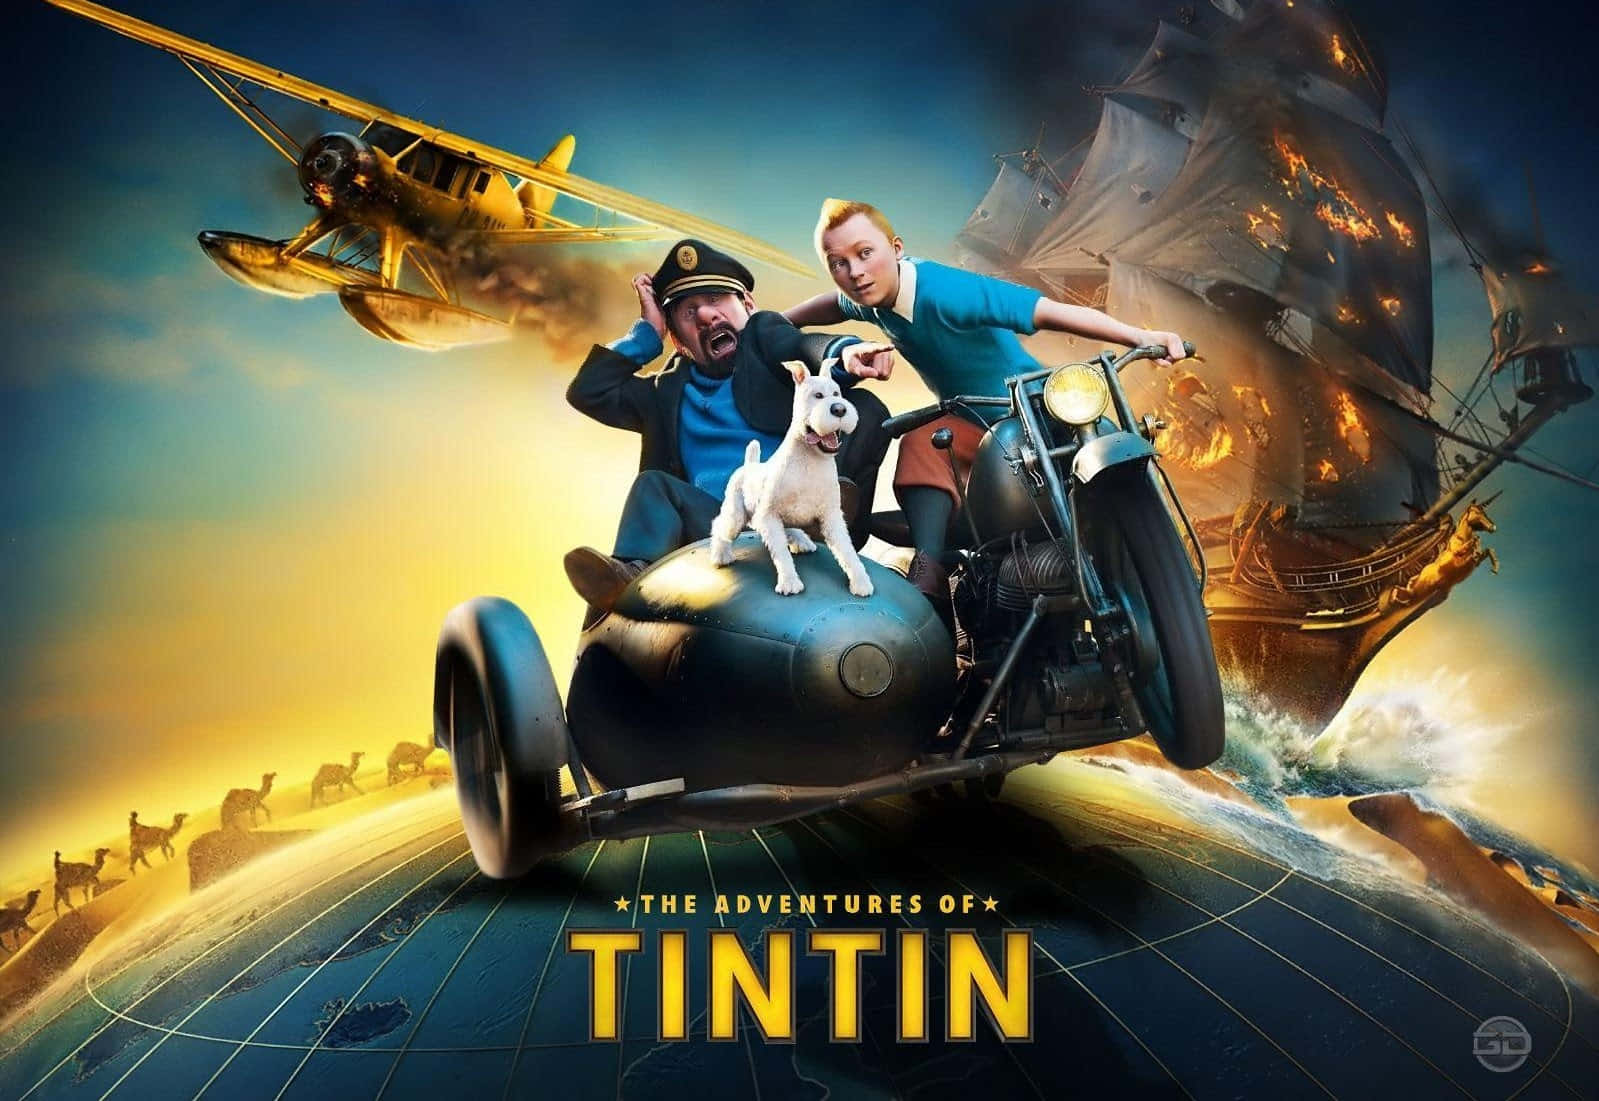 The Adventures Of Tintin Film Promotional Wallpaper